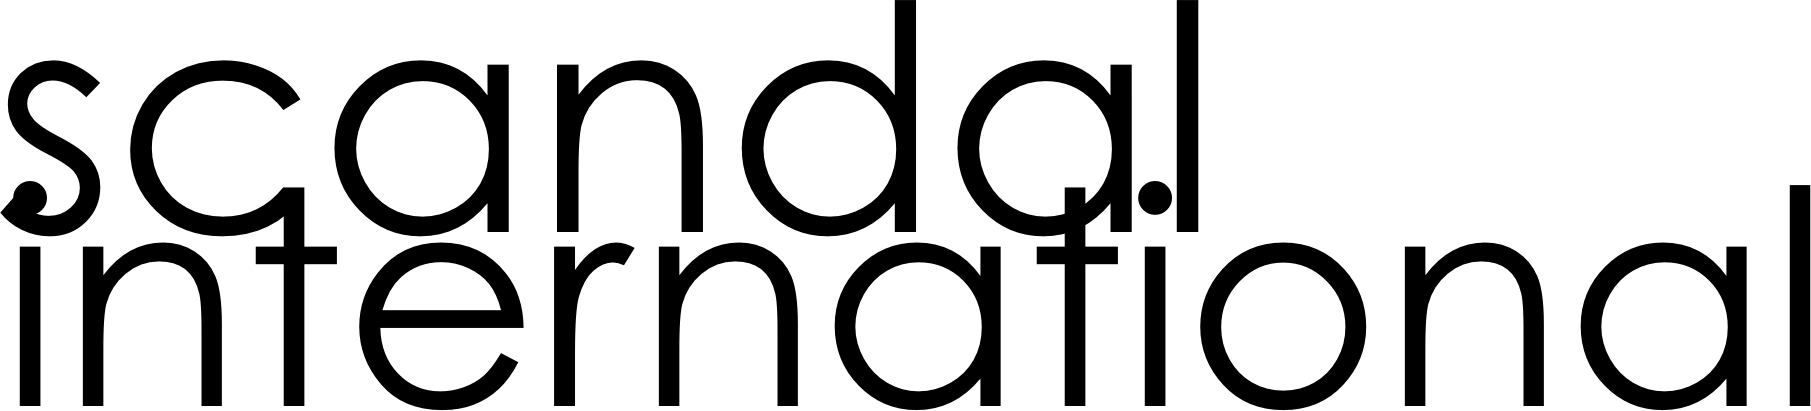 Contact - United Artists Logo Png (1811x411)